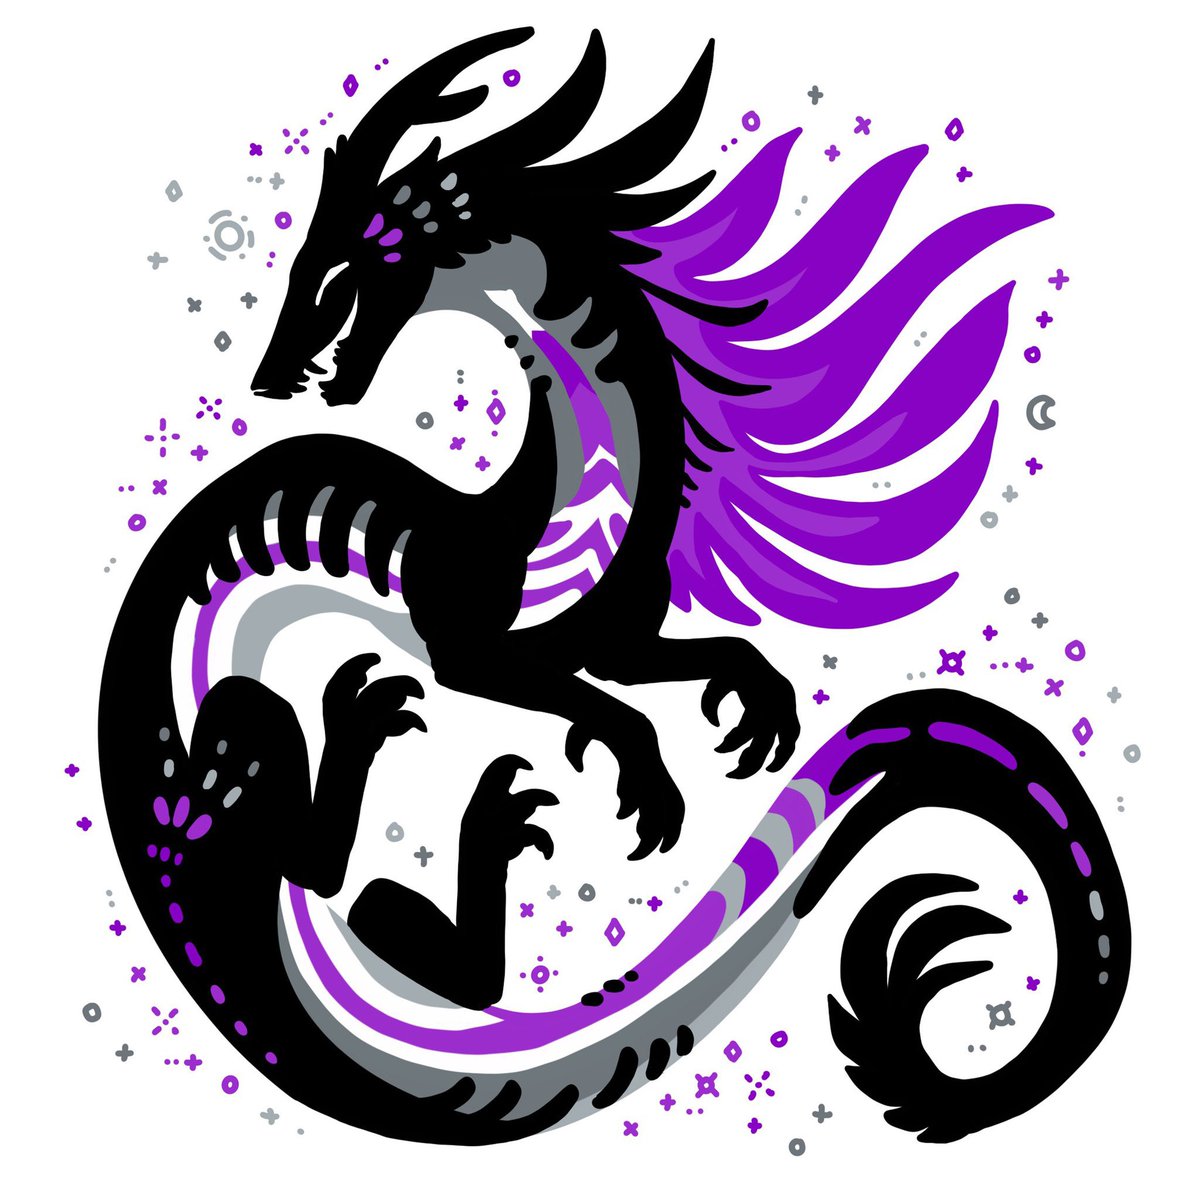 Happy #InternationalAceDay! Here are some ace dragons 💜🖤🤍